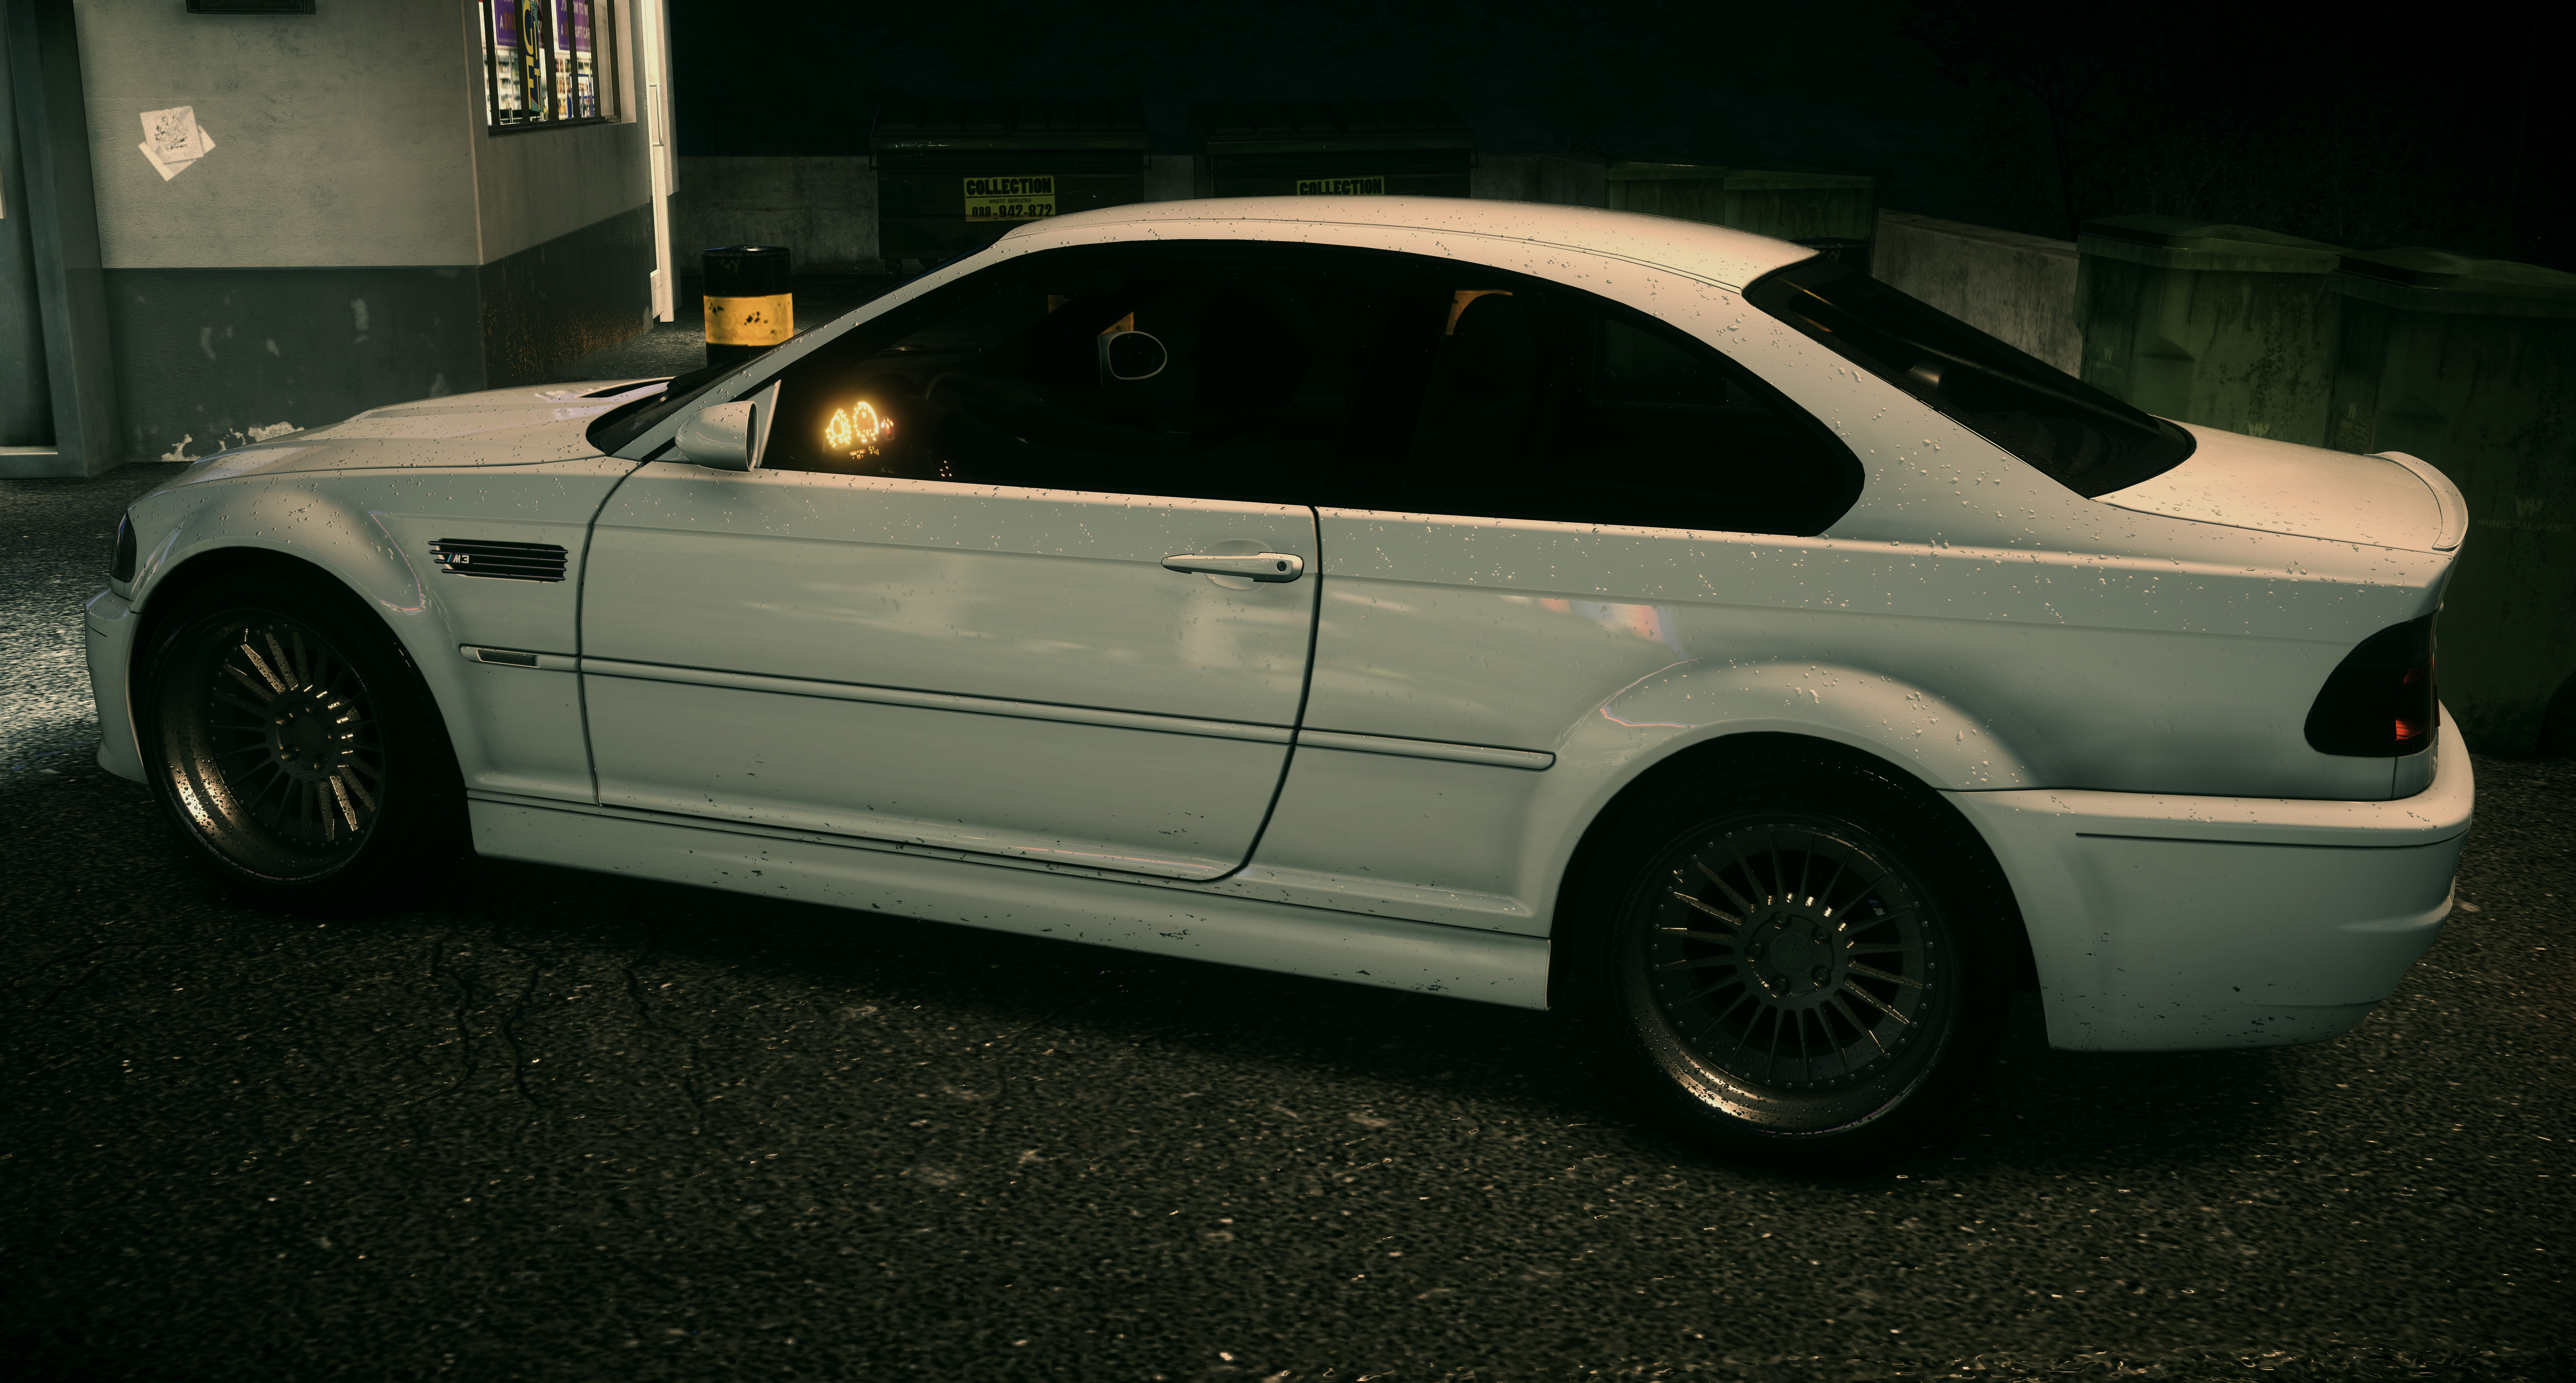 BMW M3 E46 NFS 2015 Need For Speed Need For Speed 2015 11k Image In Game Cinematic 11476x6160